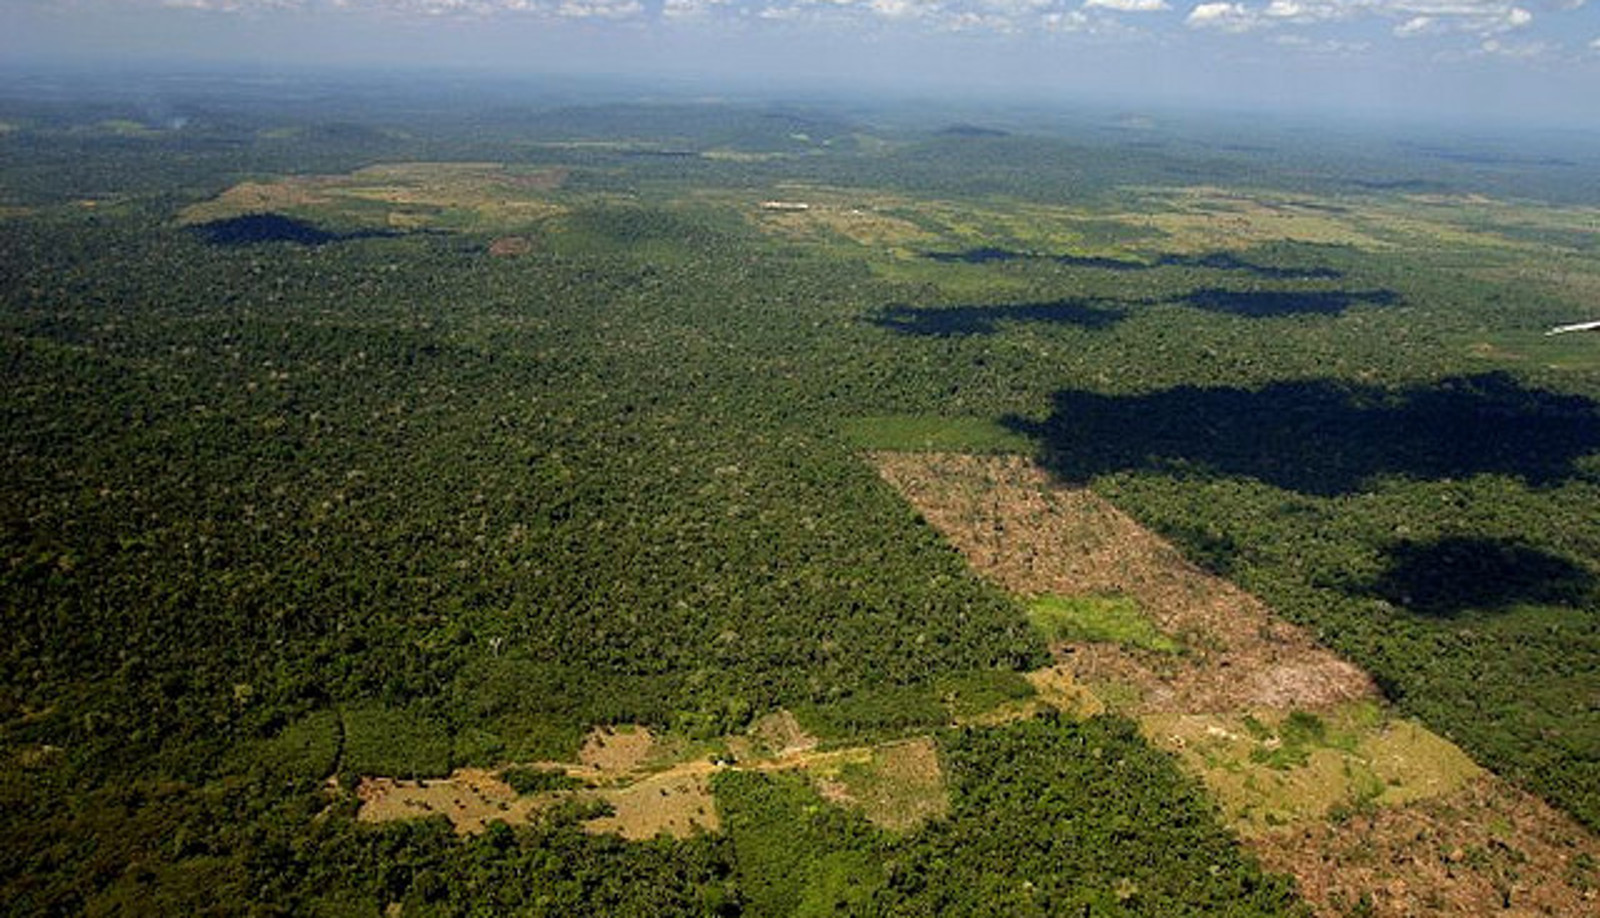 Shocking Photos That Illustrate the Reality of Deforestation